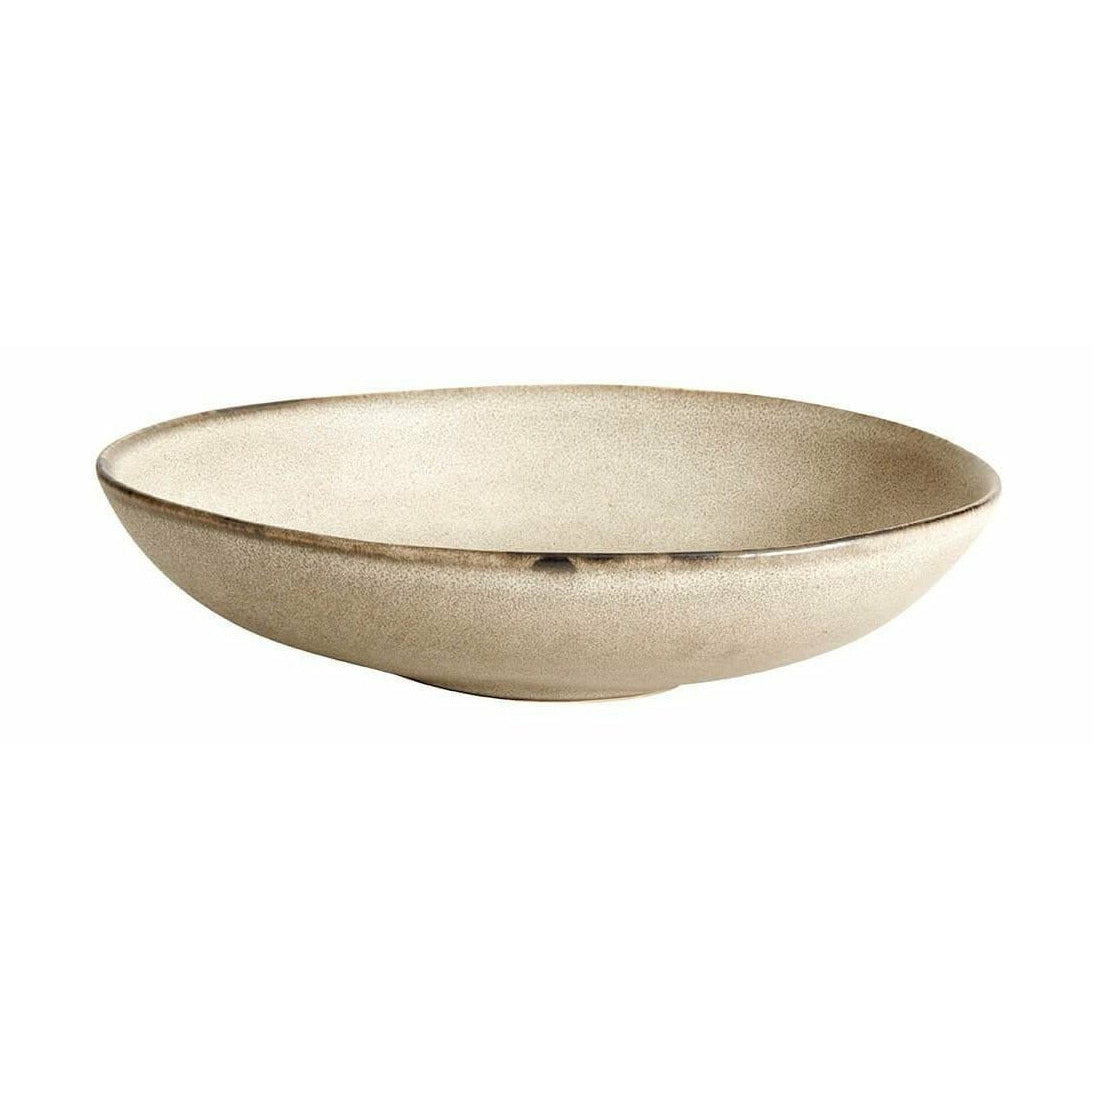 Muubs Mame Serving Bowl Oyster, 19cm